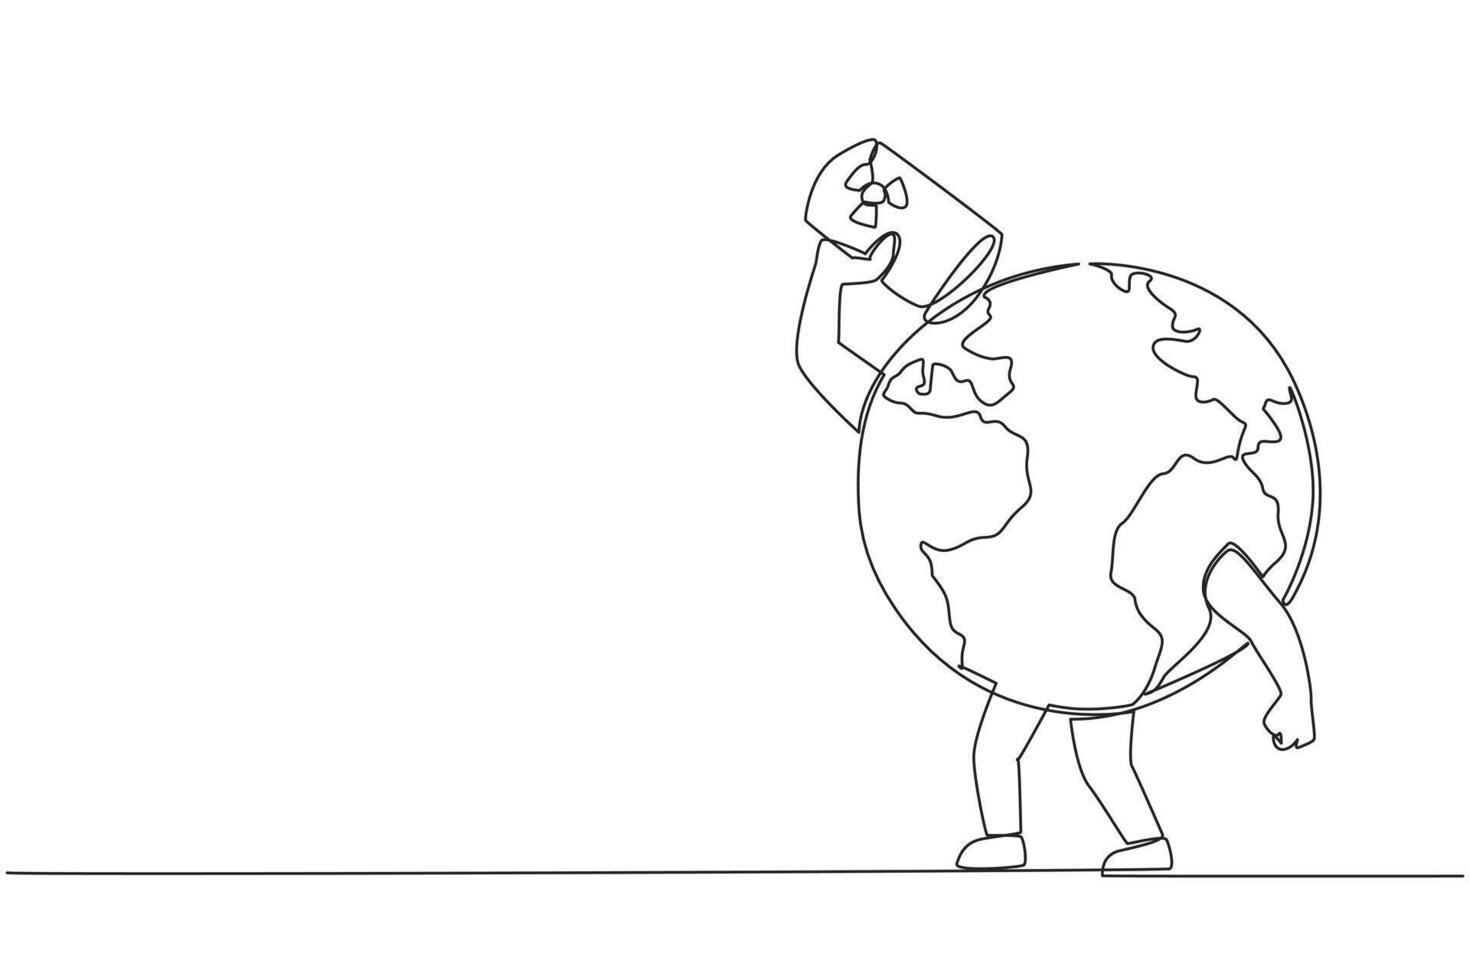 Single continuous line drawing globe drinking oil drums. Exploiting natural resources can also damage earth. Dangerous to earth. The extinction of the ecosystem. One line design illustration vector